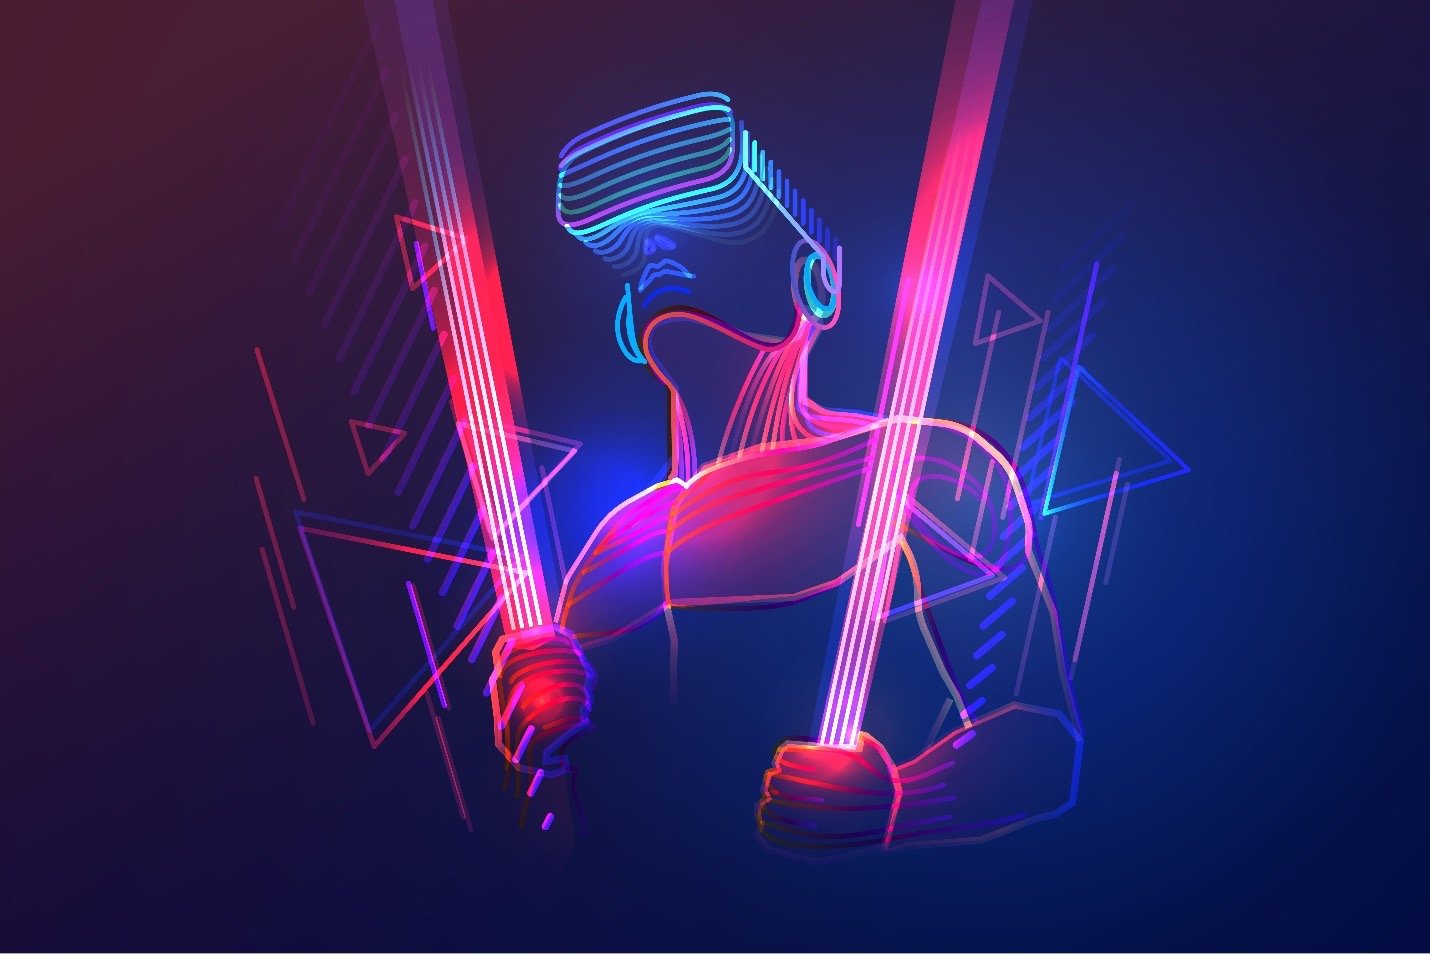 Man wearing vr headset and using light saber in abstract digital world with neon lines